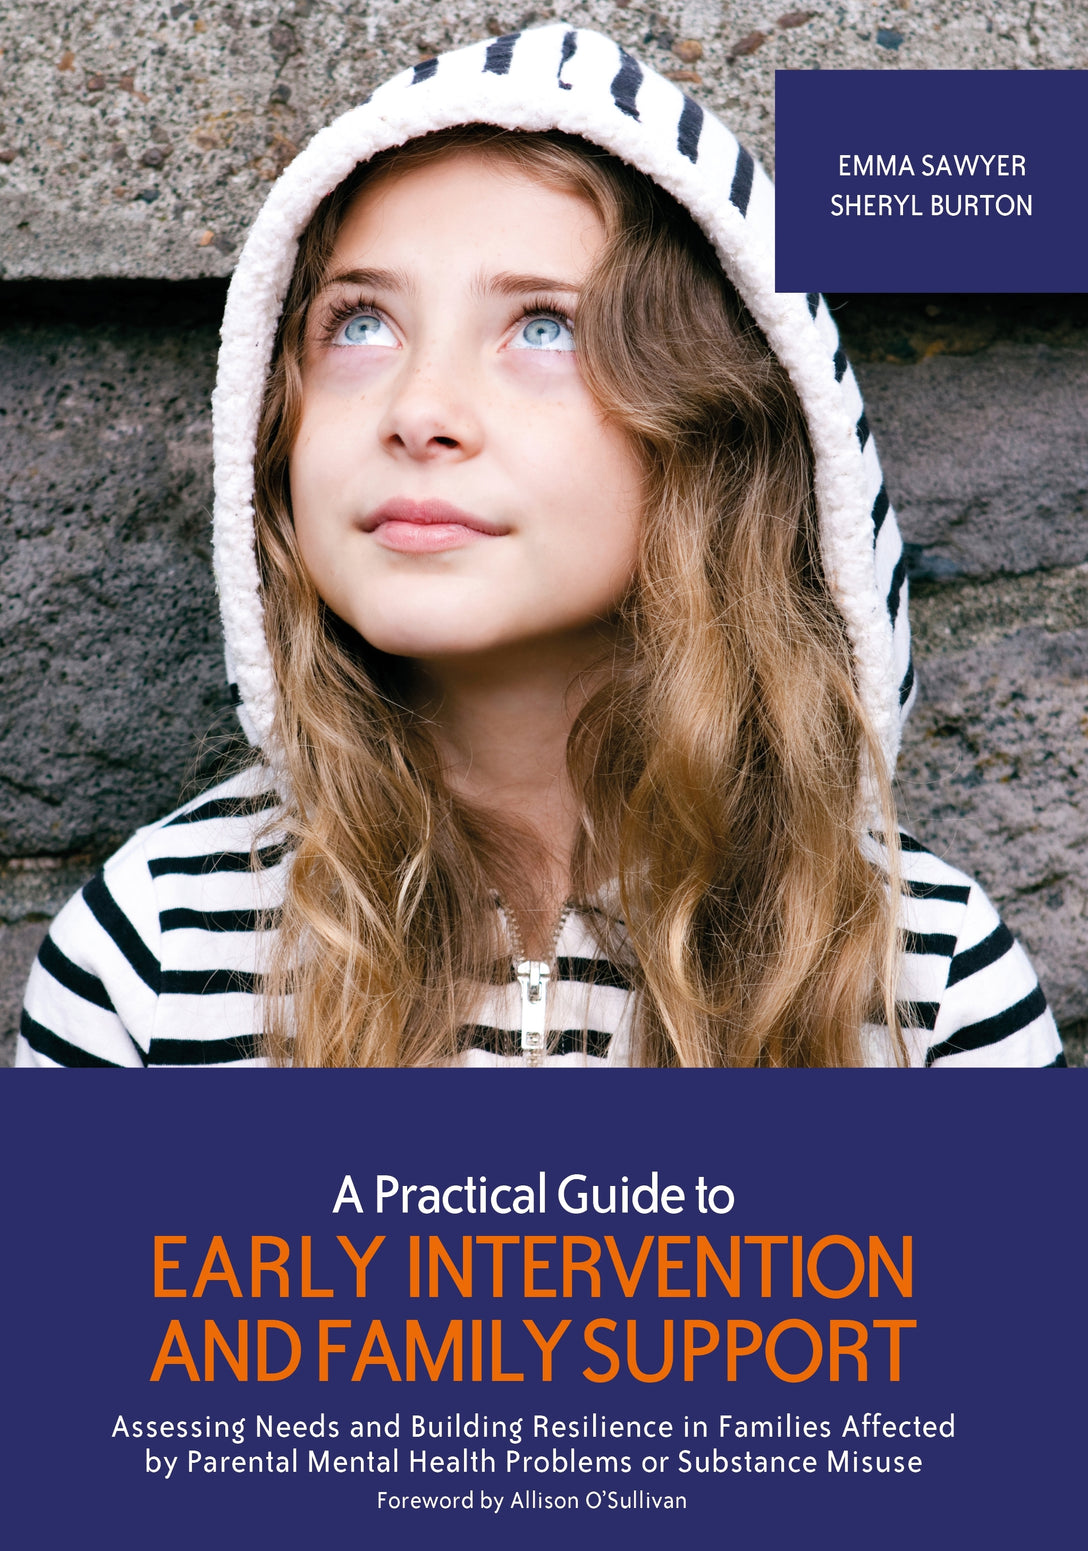 A Practical Guide to Early Intervention and Family Support by Sheryl Burton, Allison O’Sullivan, Emma Sawyer